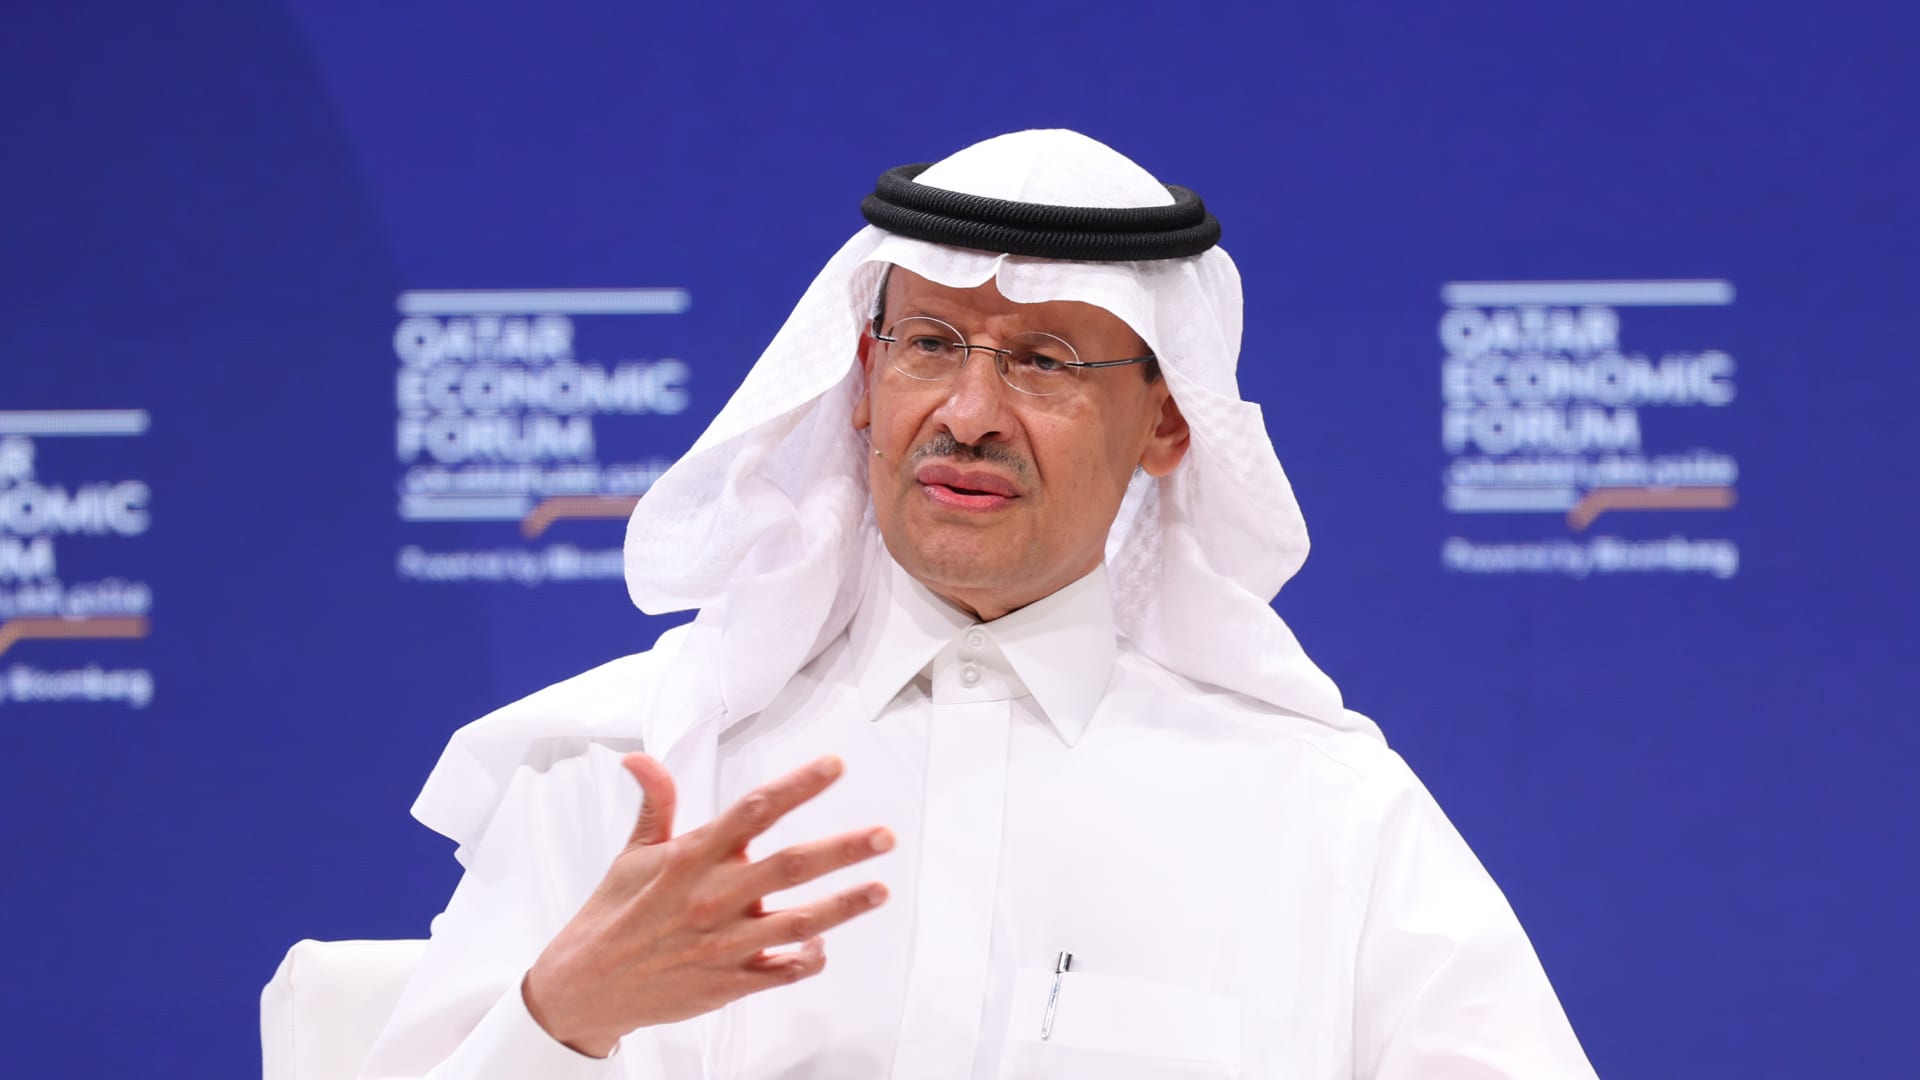 Saudi oil minister warns market speculators to ‘be careful’ ahead of OPEC+ meeting